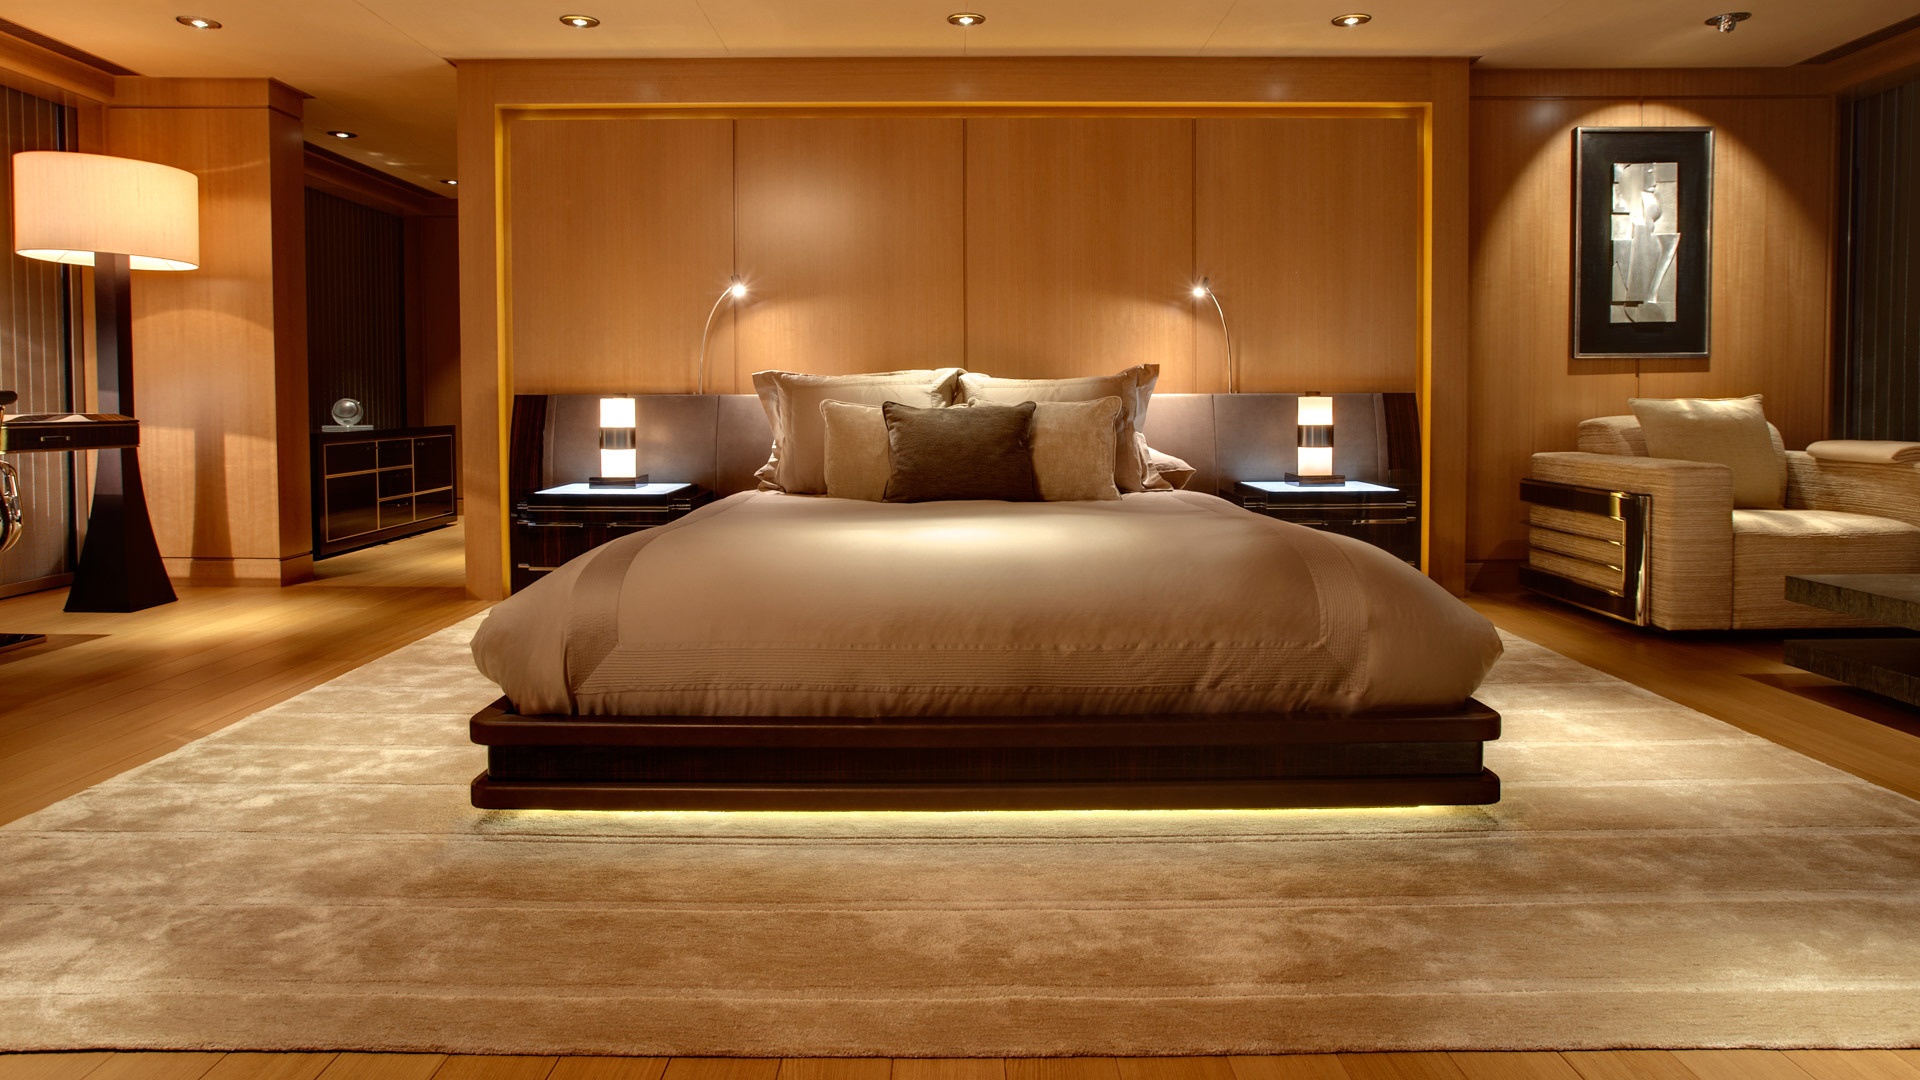 interiors Bedroom Interior design HD Wallpapers  Desktop and Mobile  Images  Photos